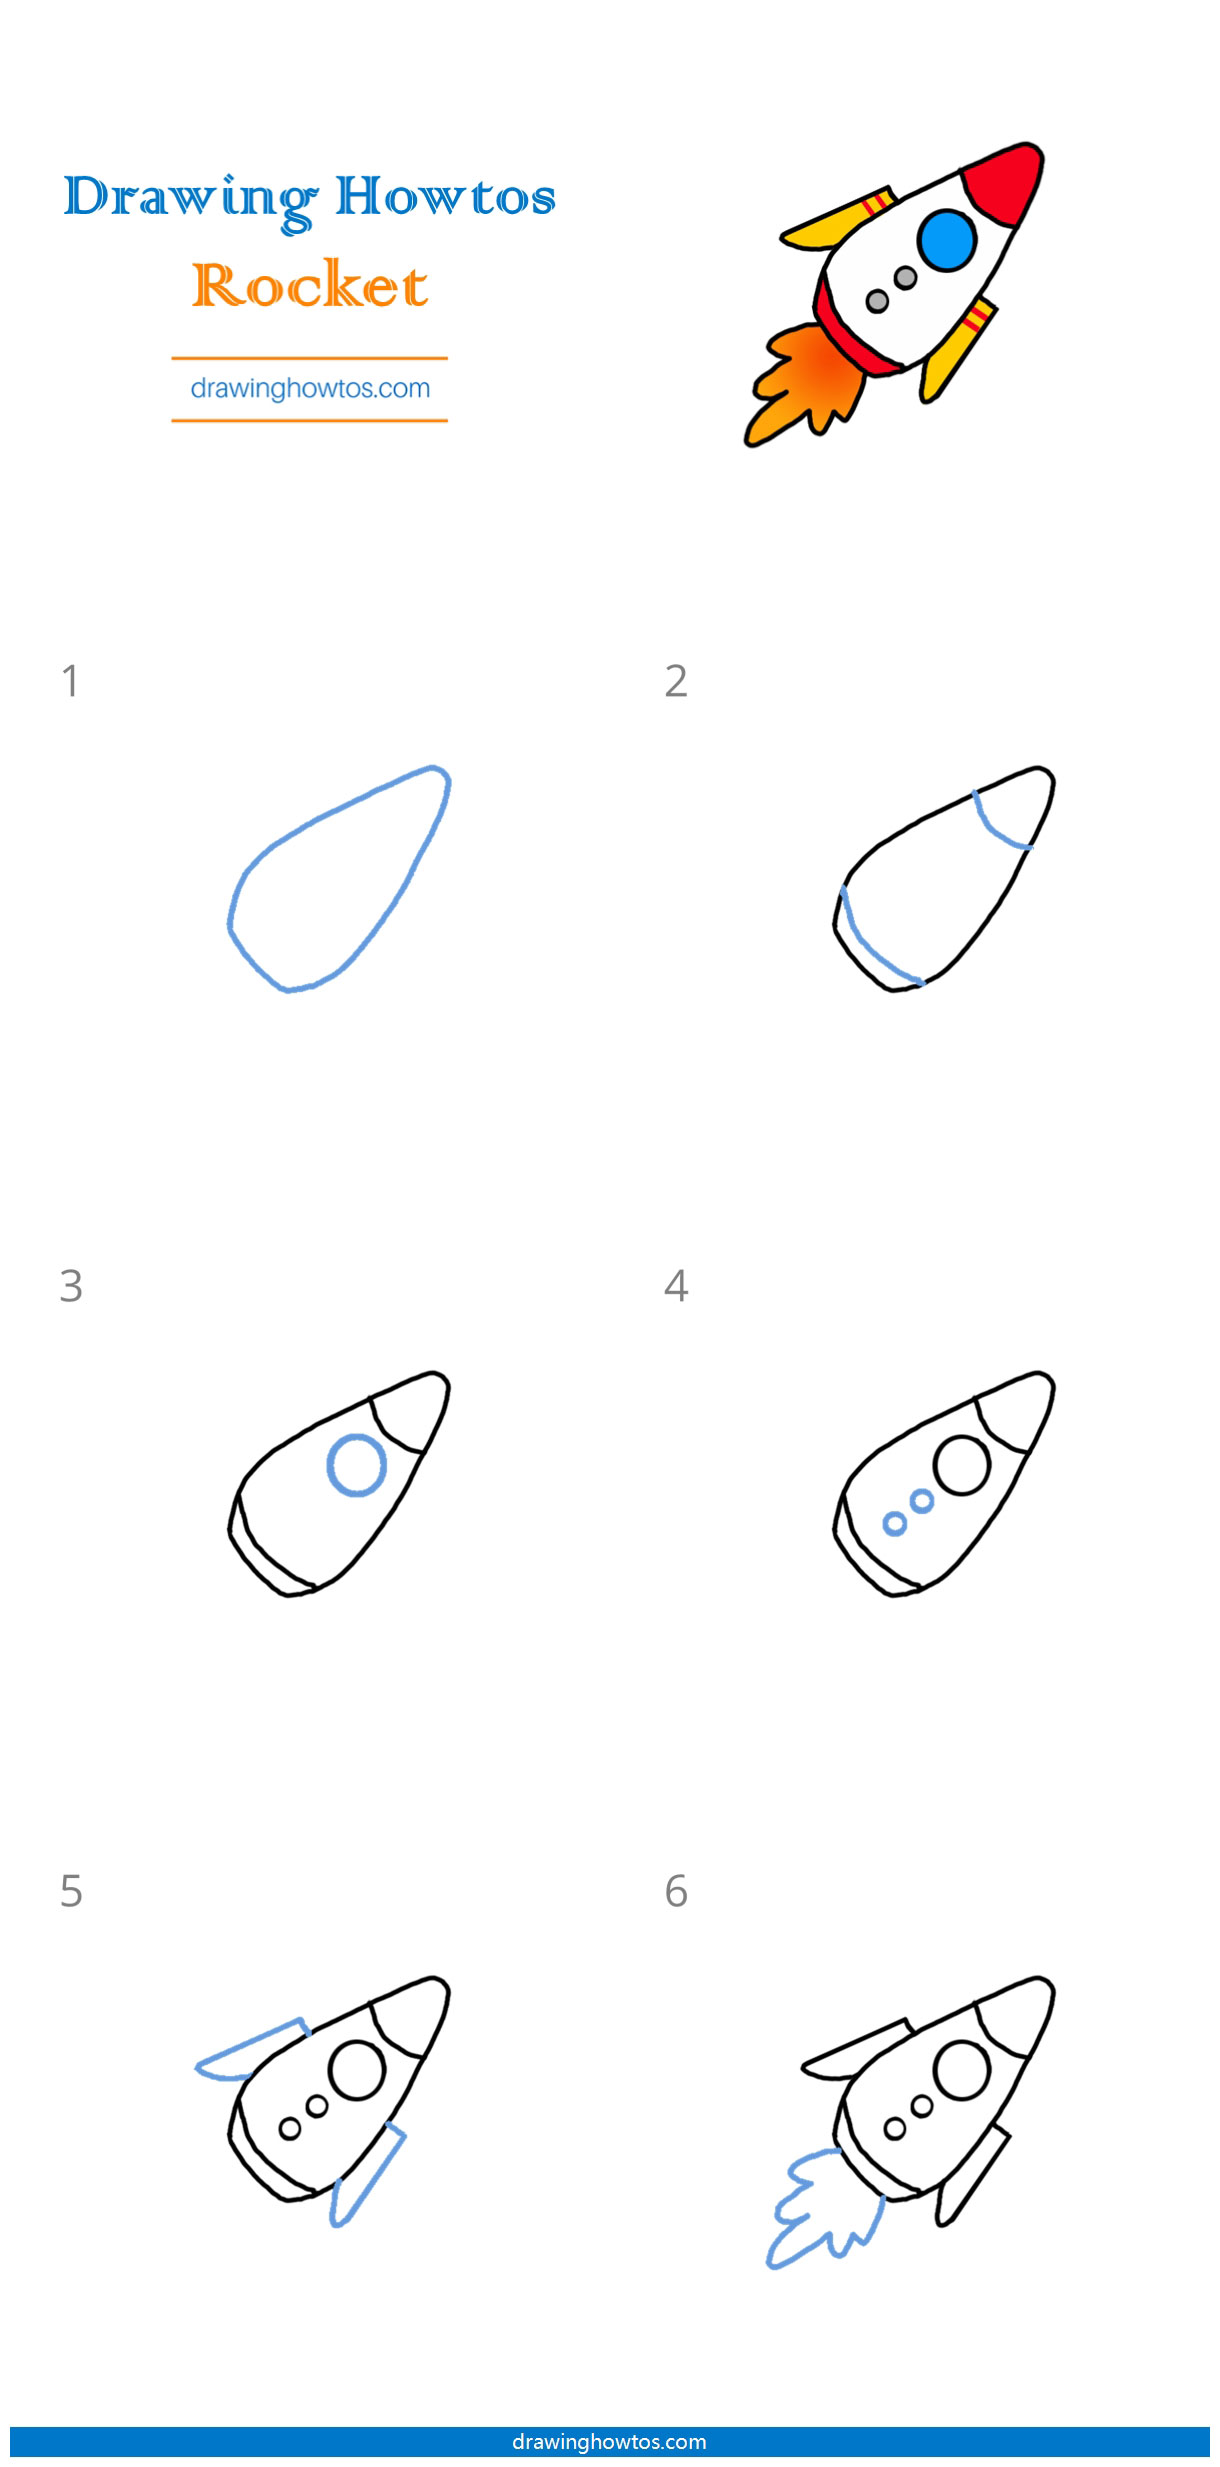 How to Draw a Rocket Step by Step